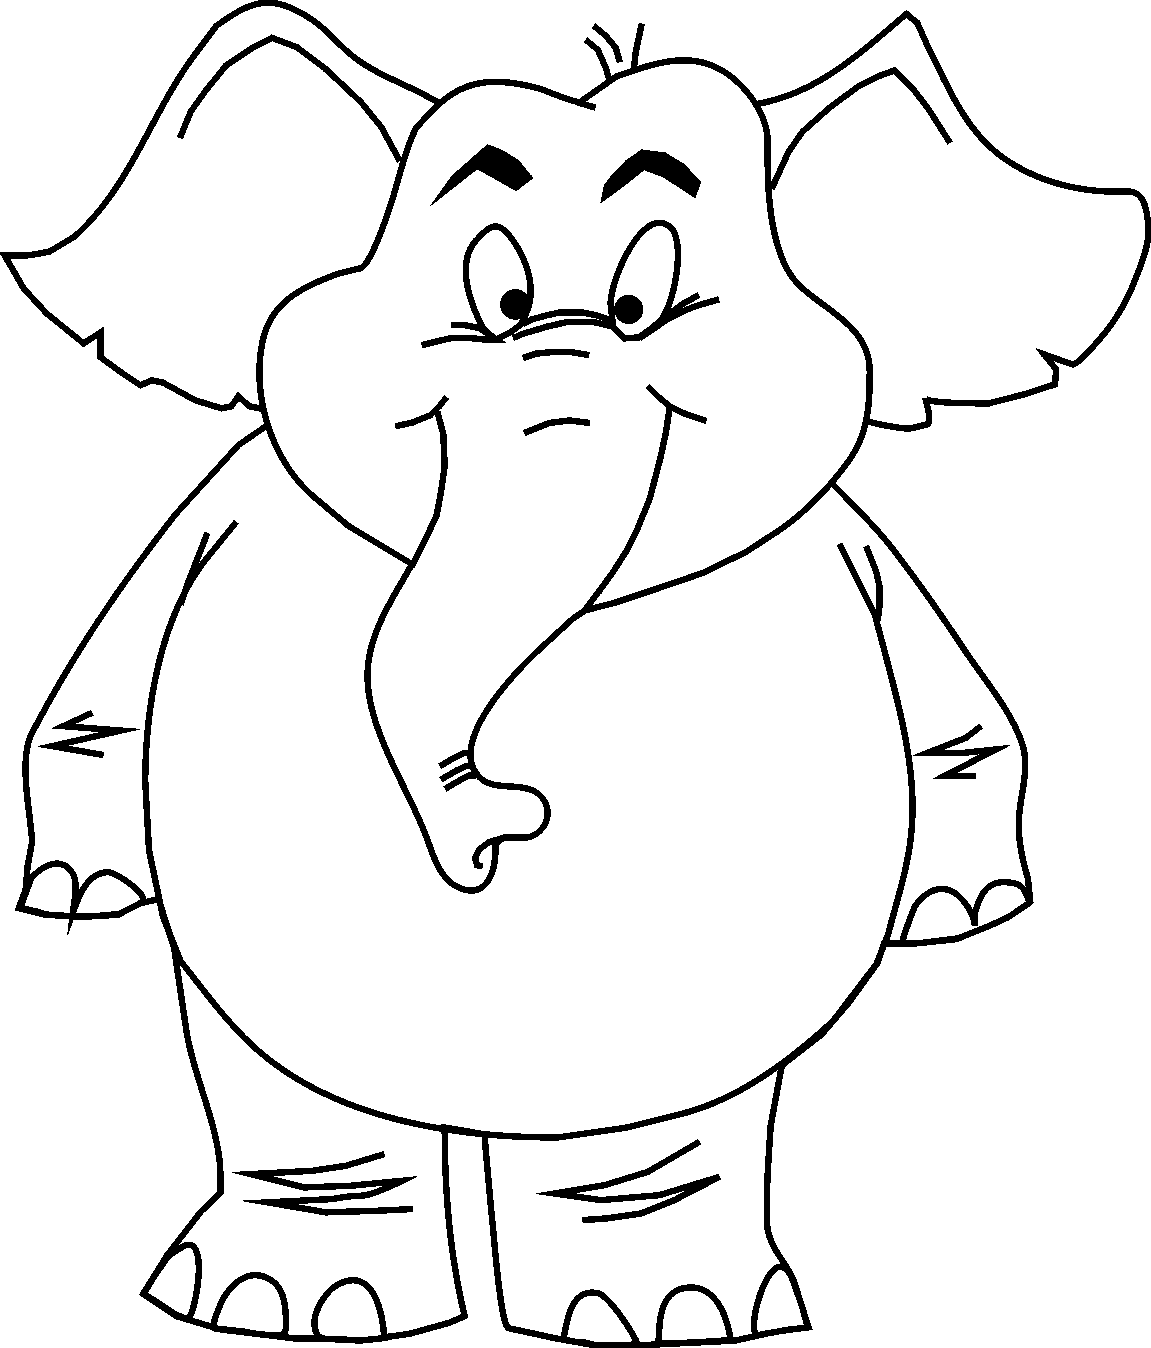 Cartoon Animals Coloring Pages Hd Widescreen 11 HD Wallpapers 